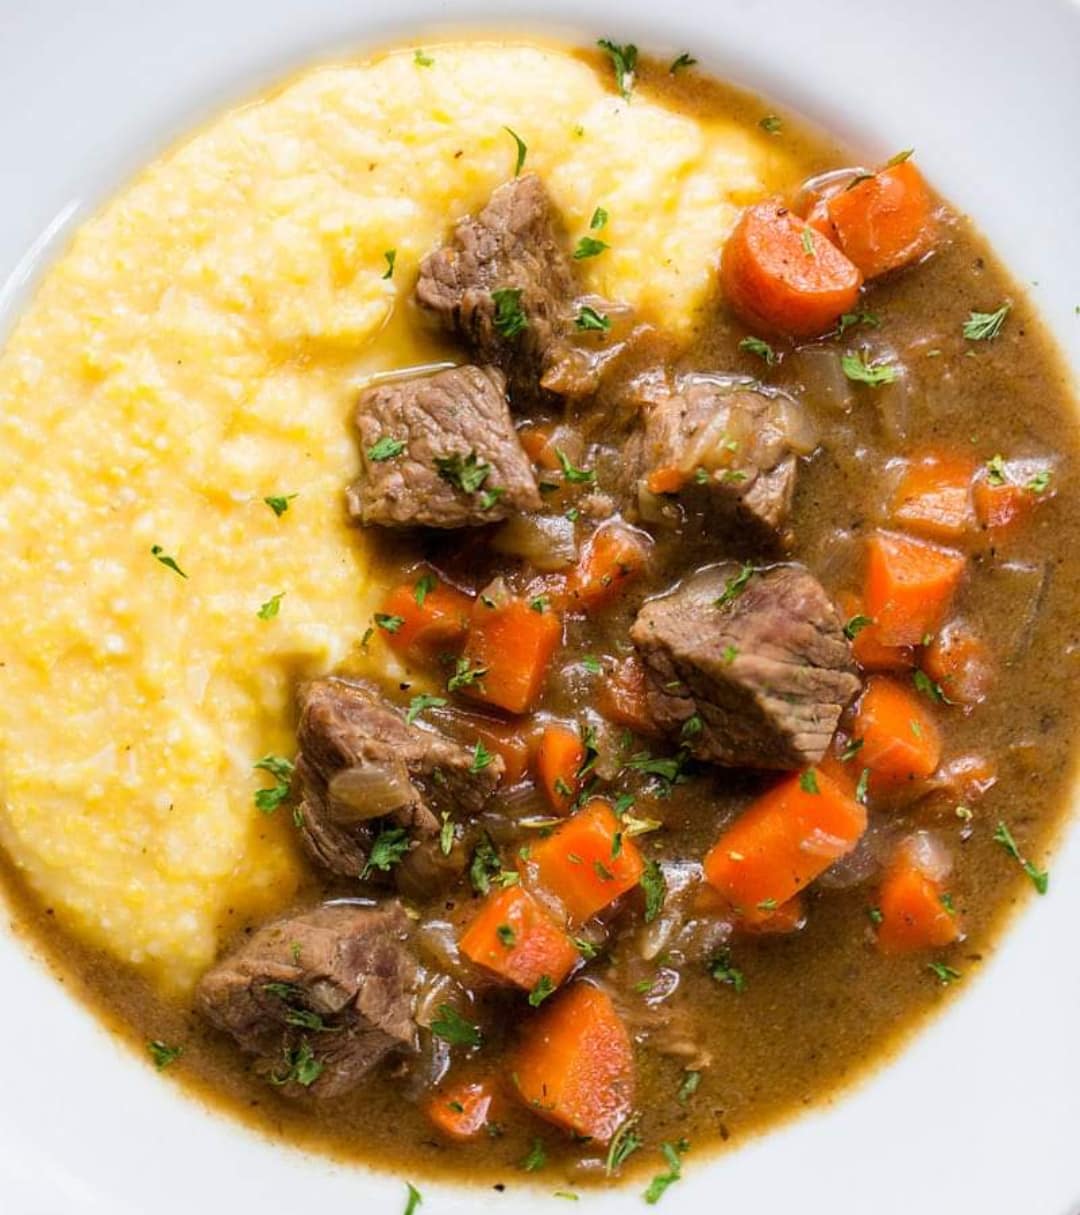 TUSCAN BEEF STEW WITH CHEESY POLENTA